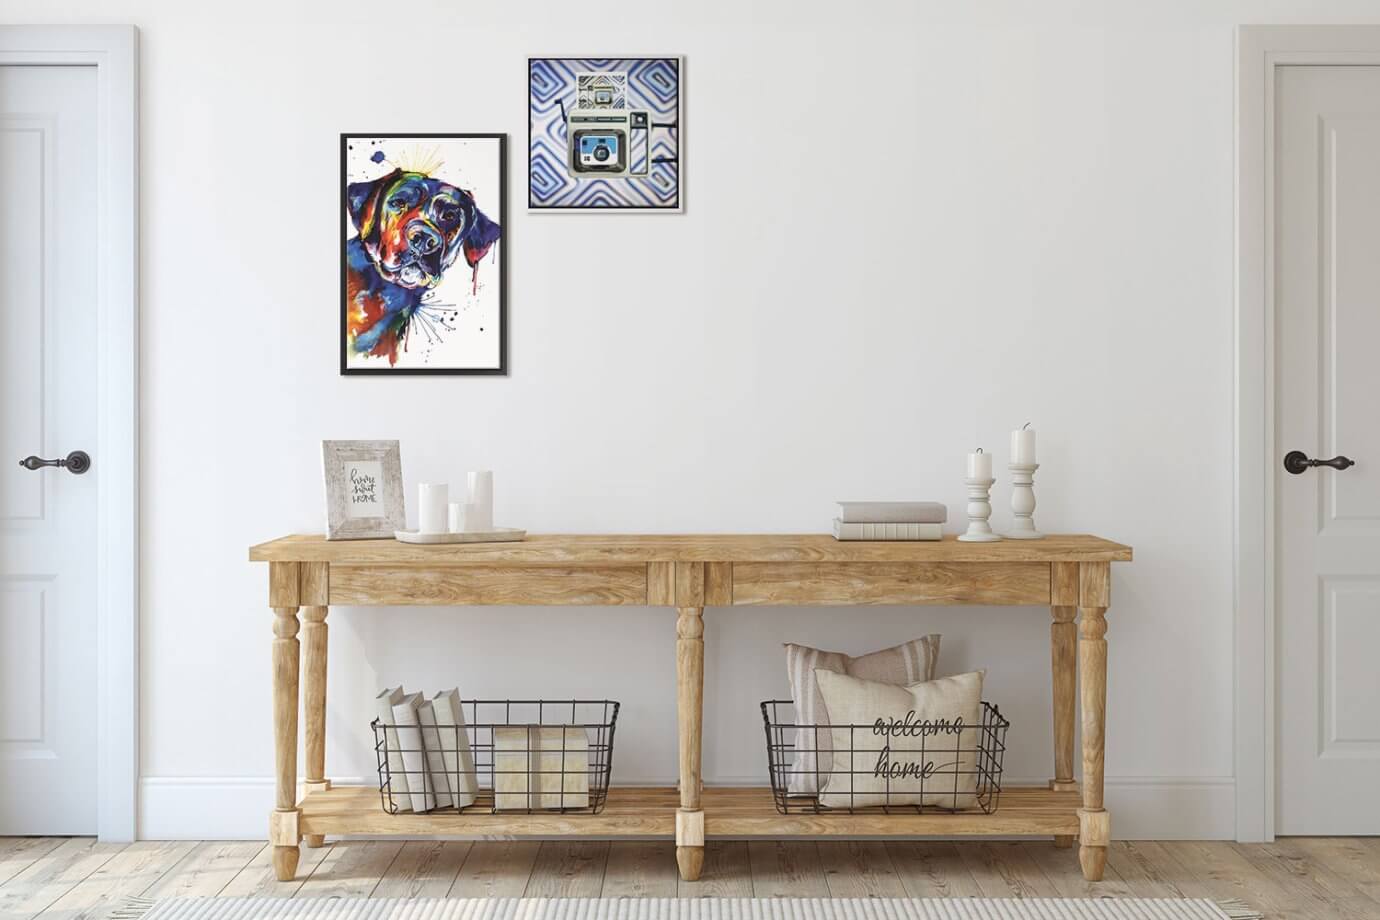 dog painting and vintage camera art above wood entryway table